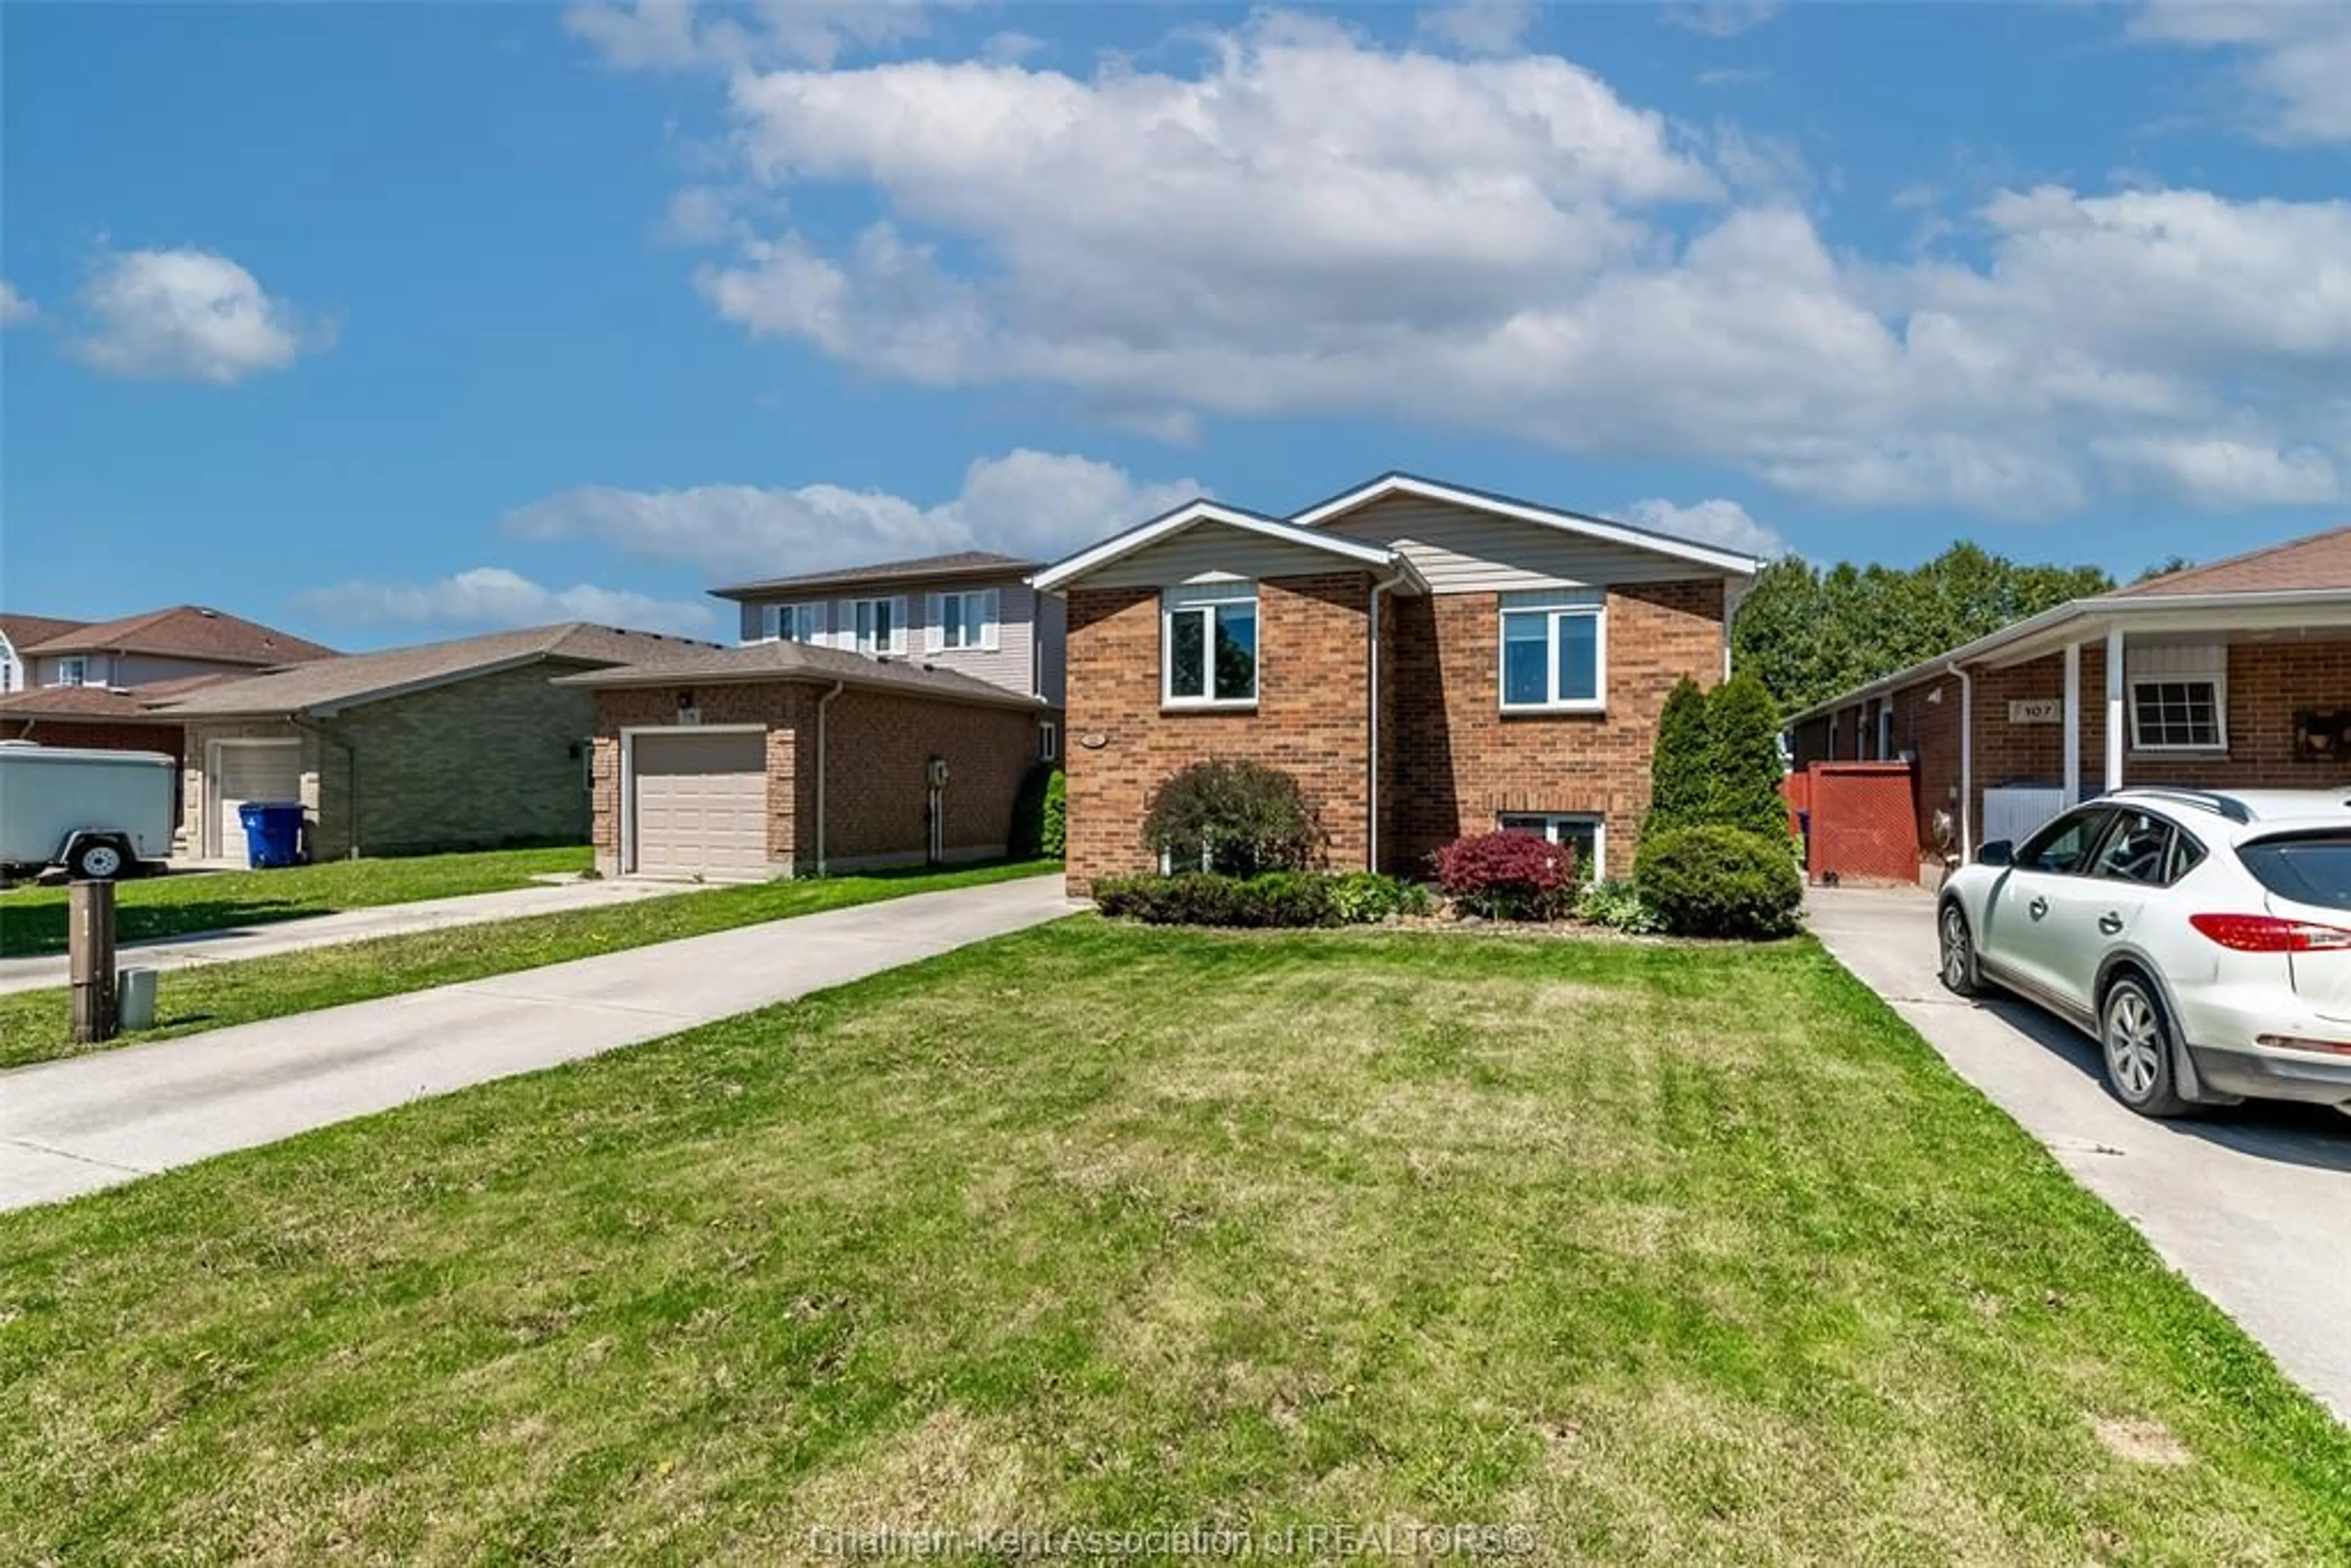 Home with brick exterior material for 111 Bristol Dr, Chatham Ontario N7M6J9